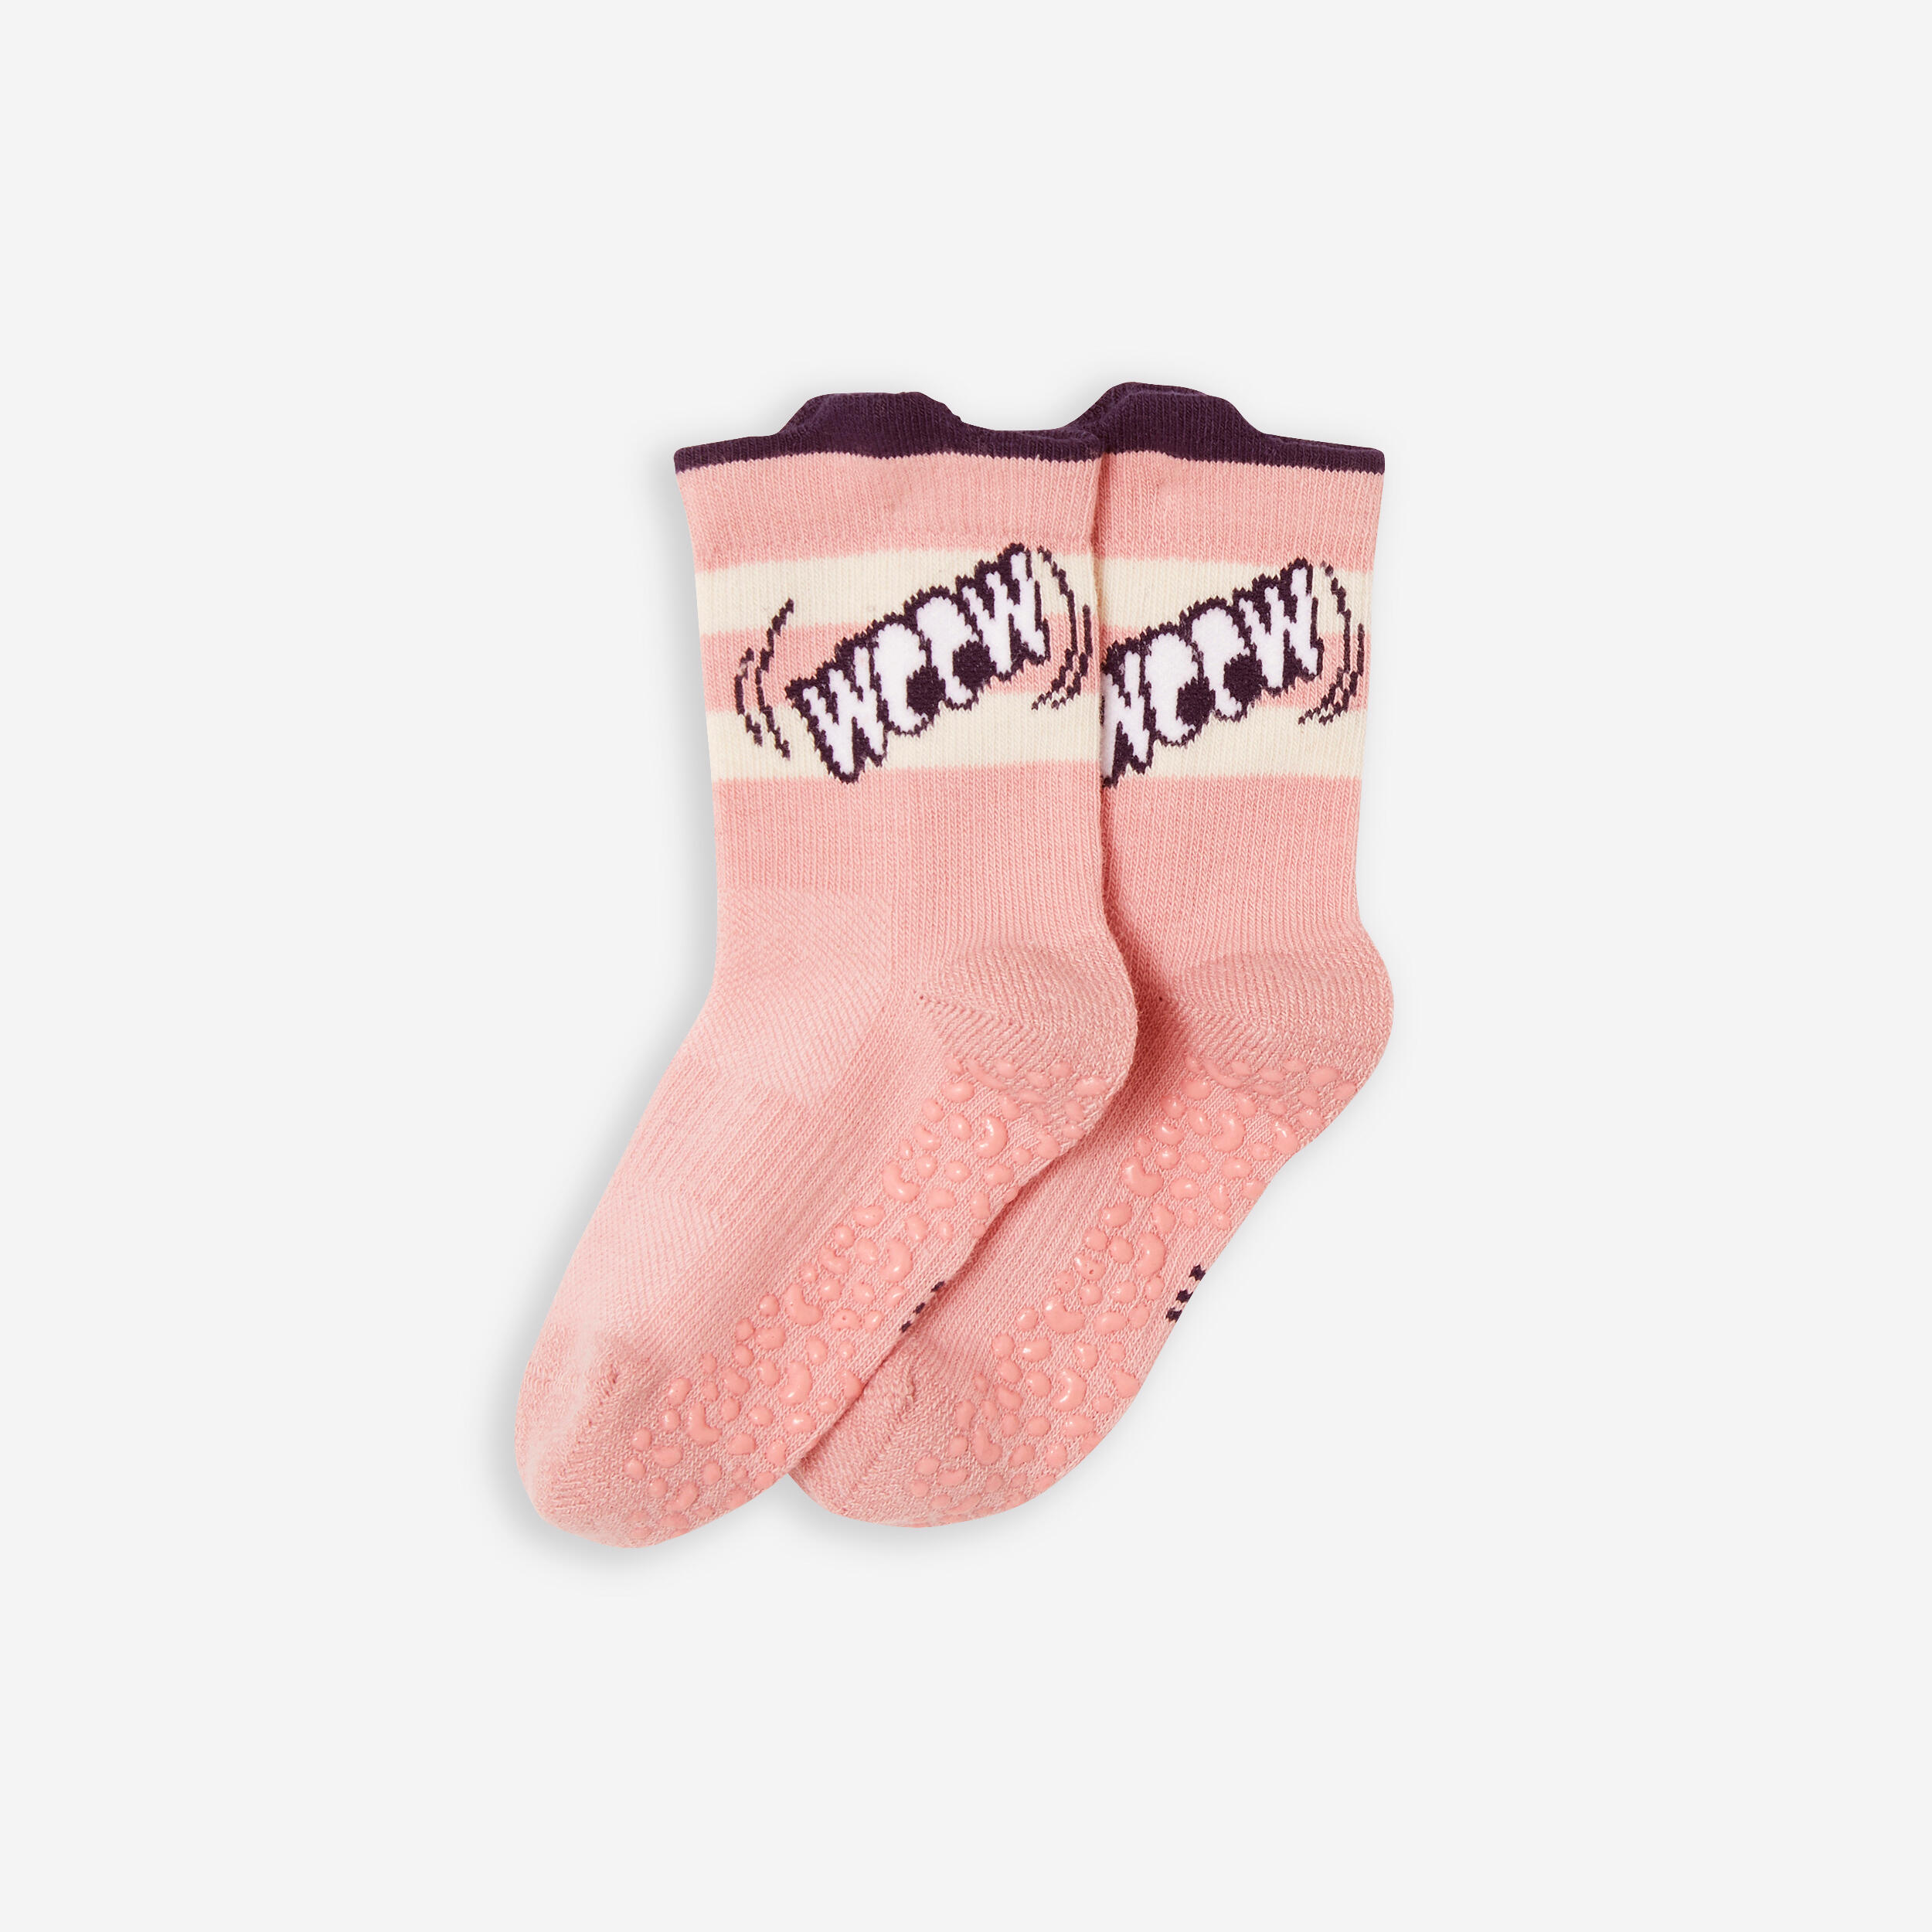 Kids' Non-Slip Mid-High Socks 600 - Pink with Pattern 1/2